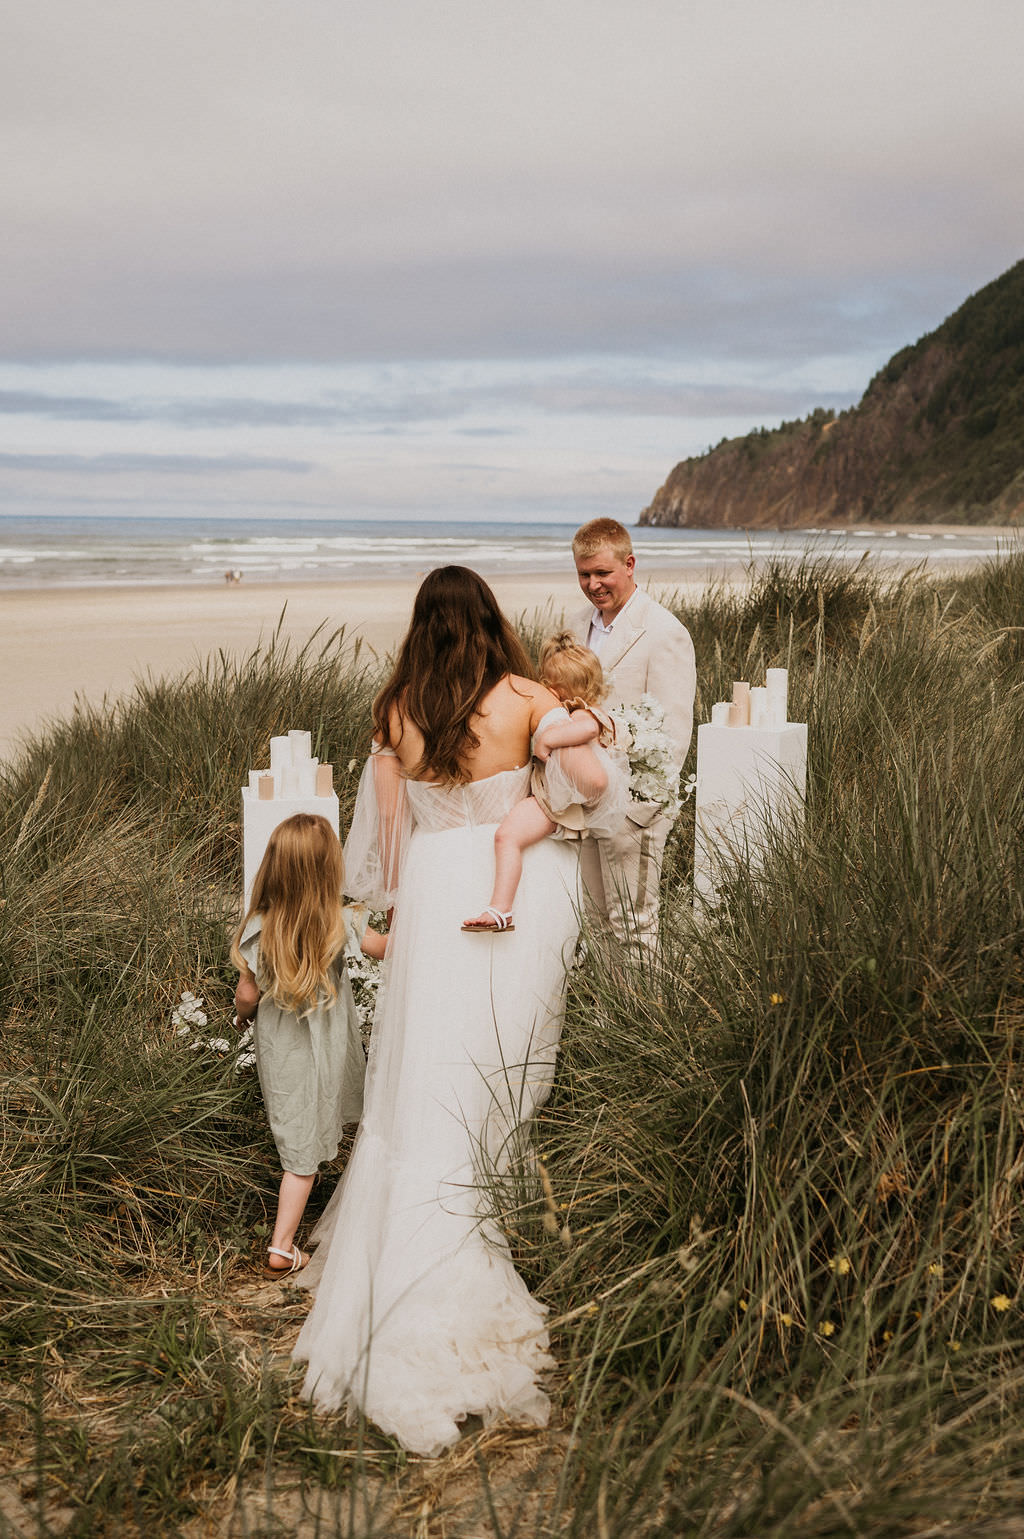 Elopement ceremony at the beach.